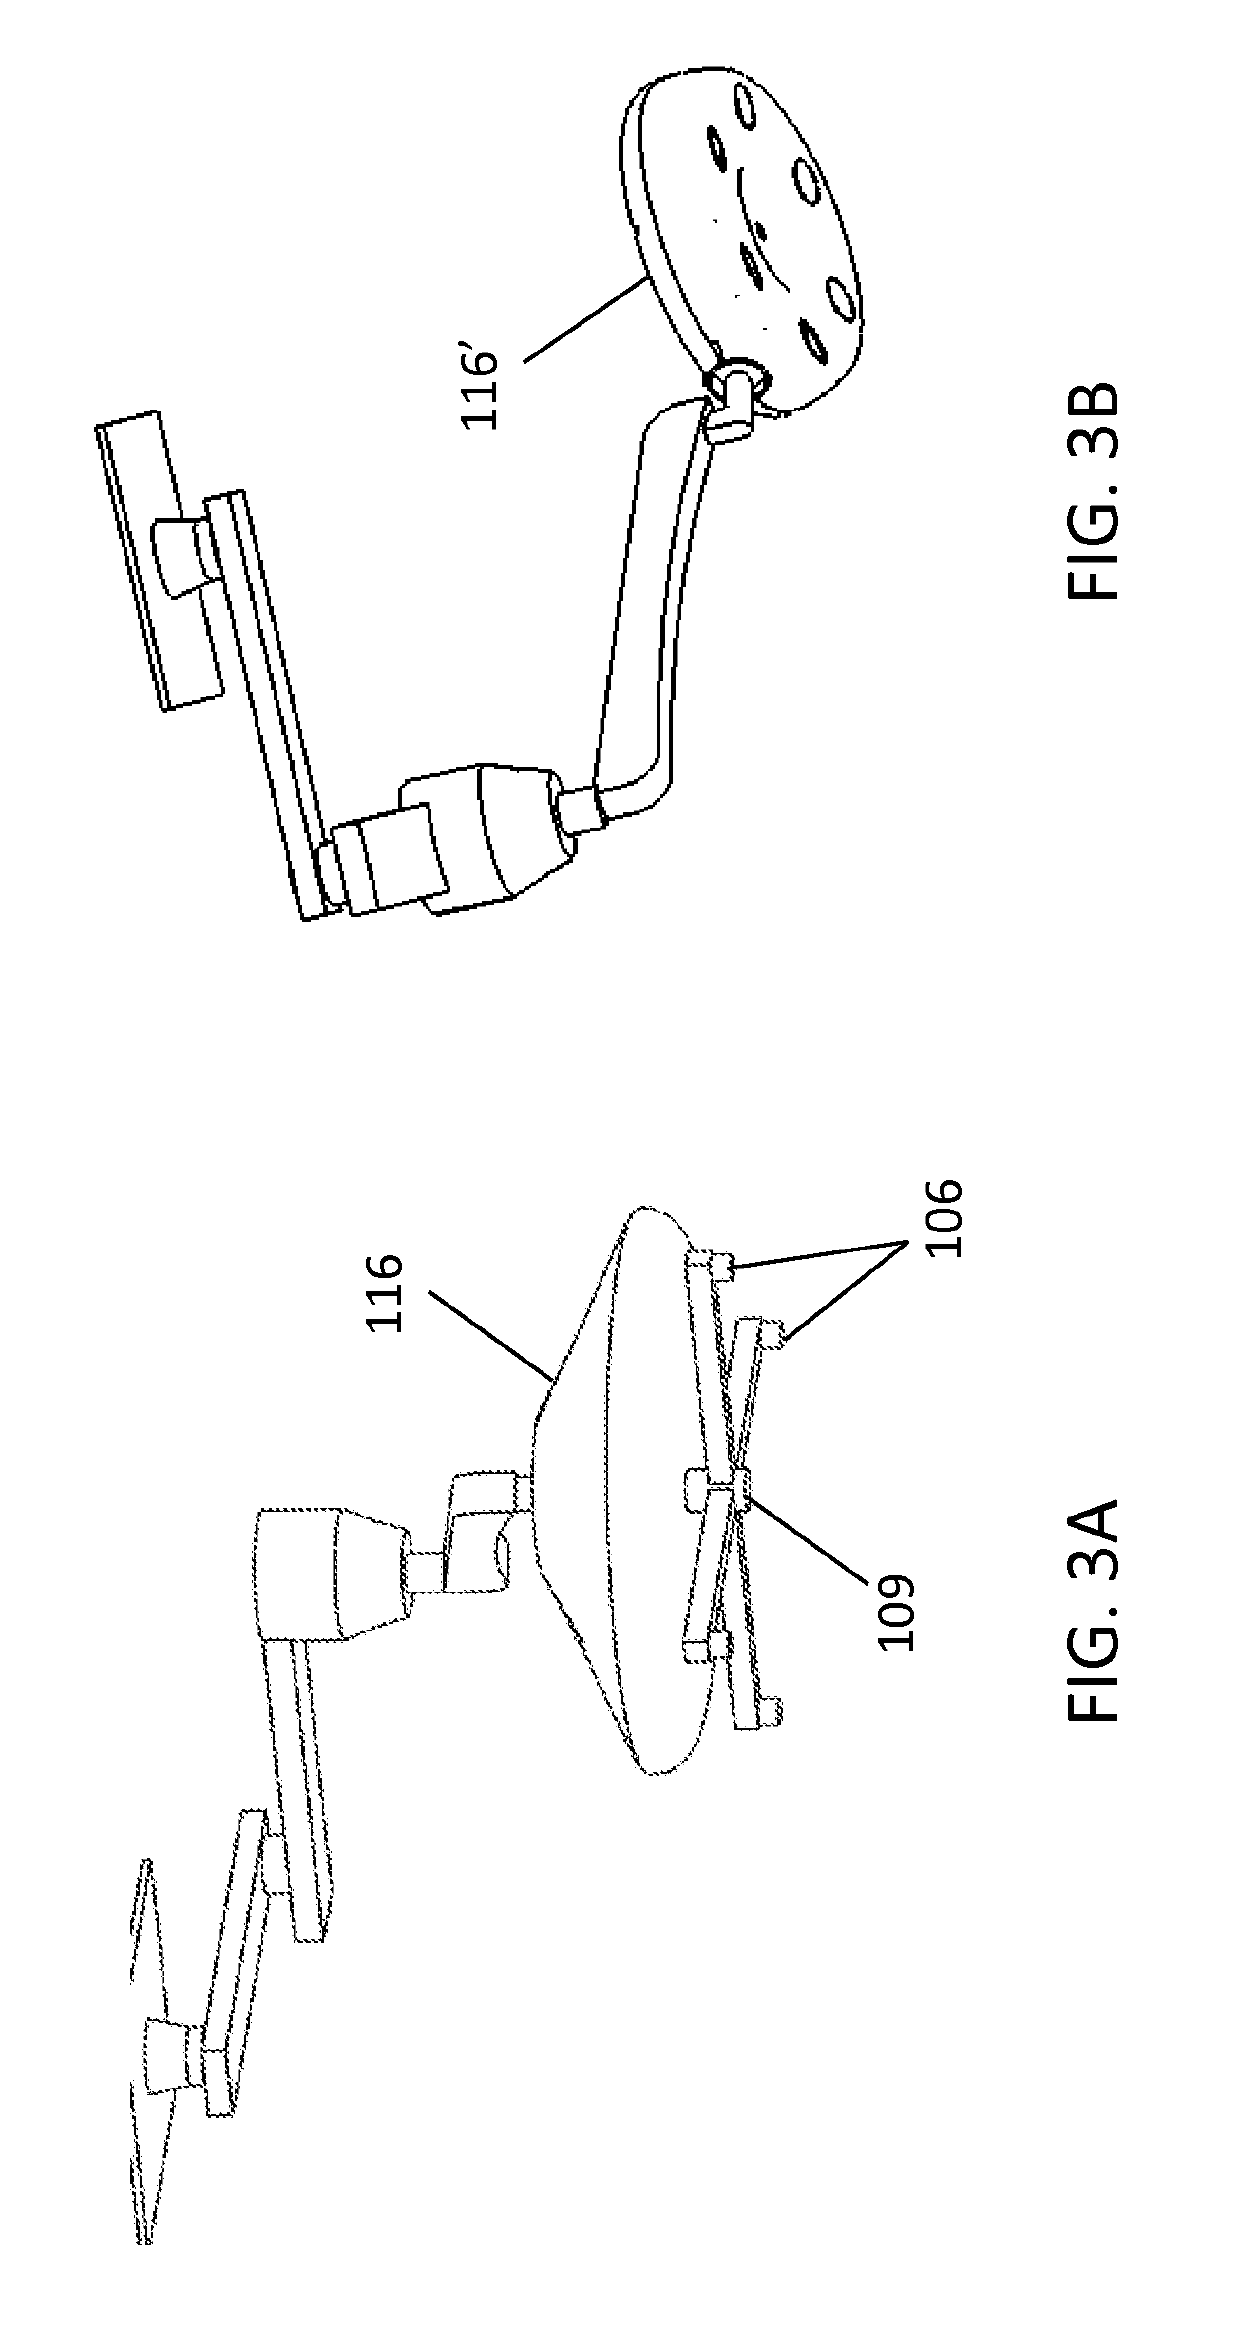 Visible light communication system for transmitting data between visual tracking systems and tracking markers